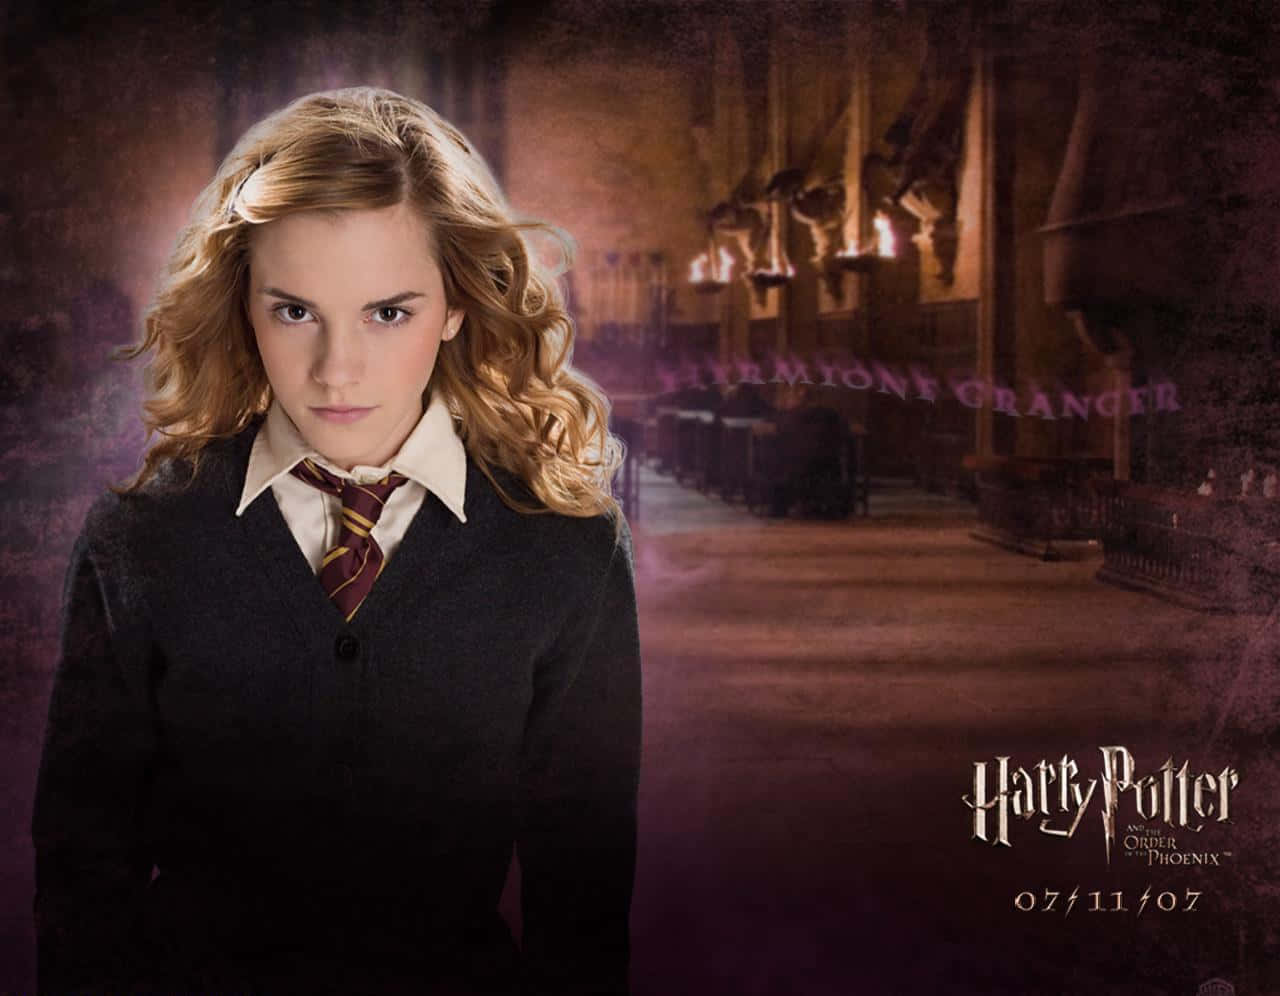 Join Dumbledore's Army with Harry Potter in The Order of Phoenix! Wallpaper